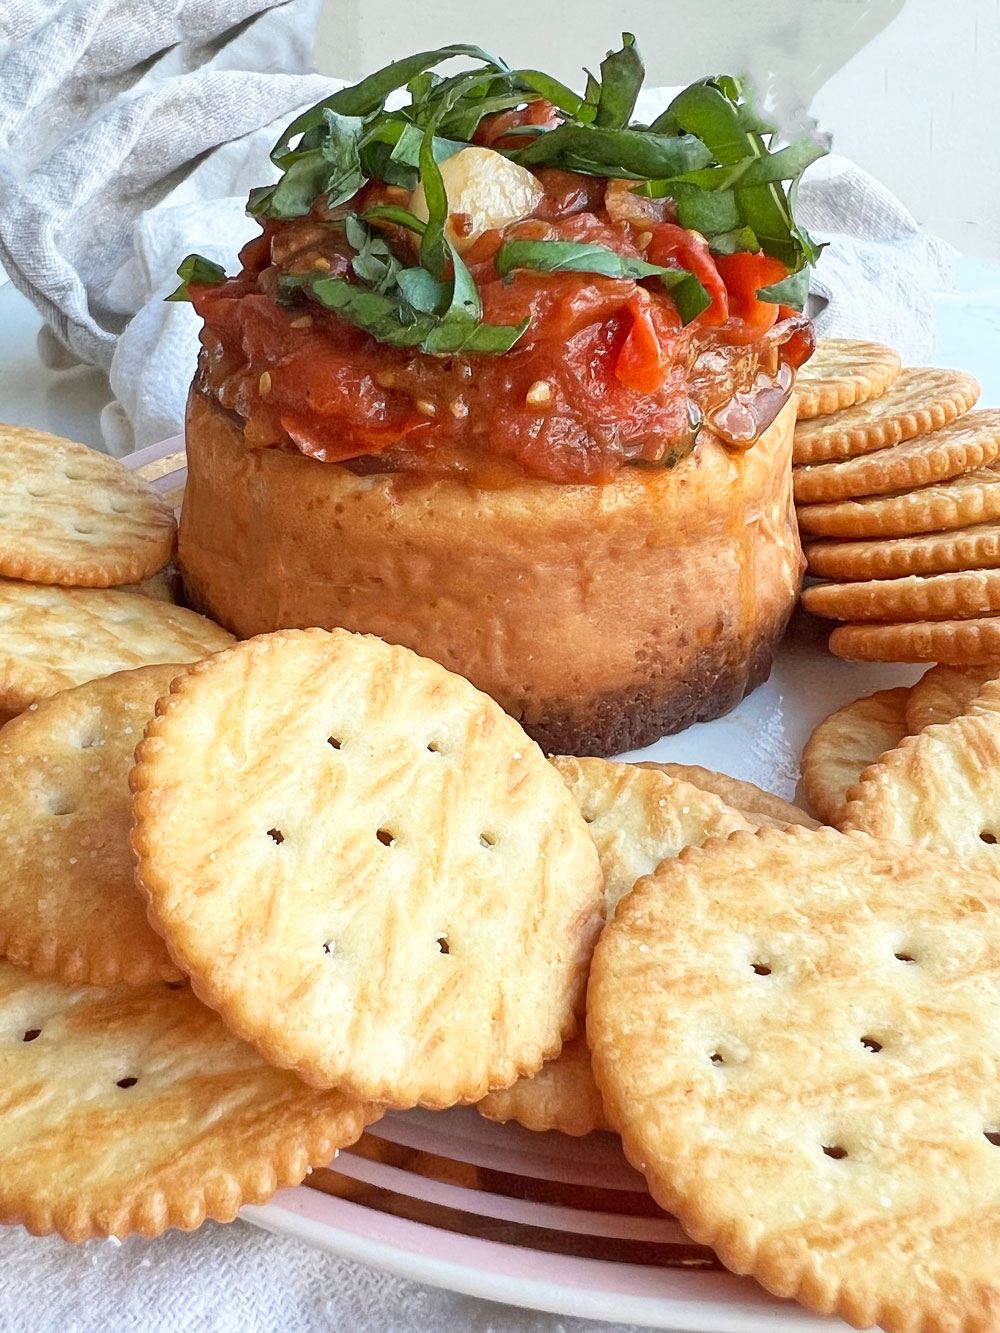 Tomato Basil Cheesecake Dip. This is an easy cheese appetizer recipe. Salty and sweet cheese with a tomato basil topping. Happy Cooking! www.ChopHappy.com #cheesedip #cheesecake